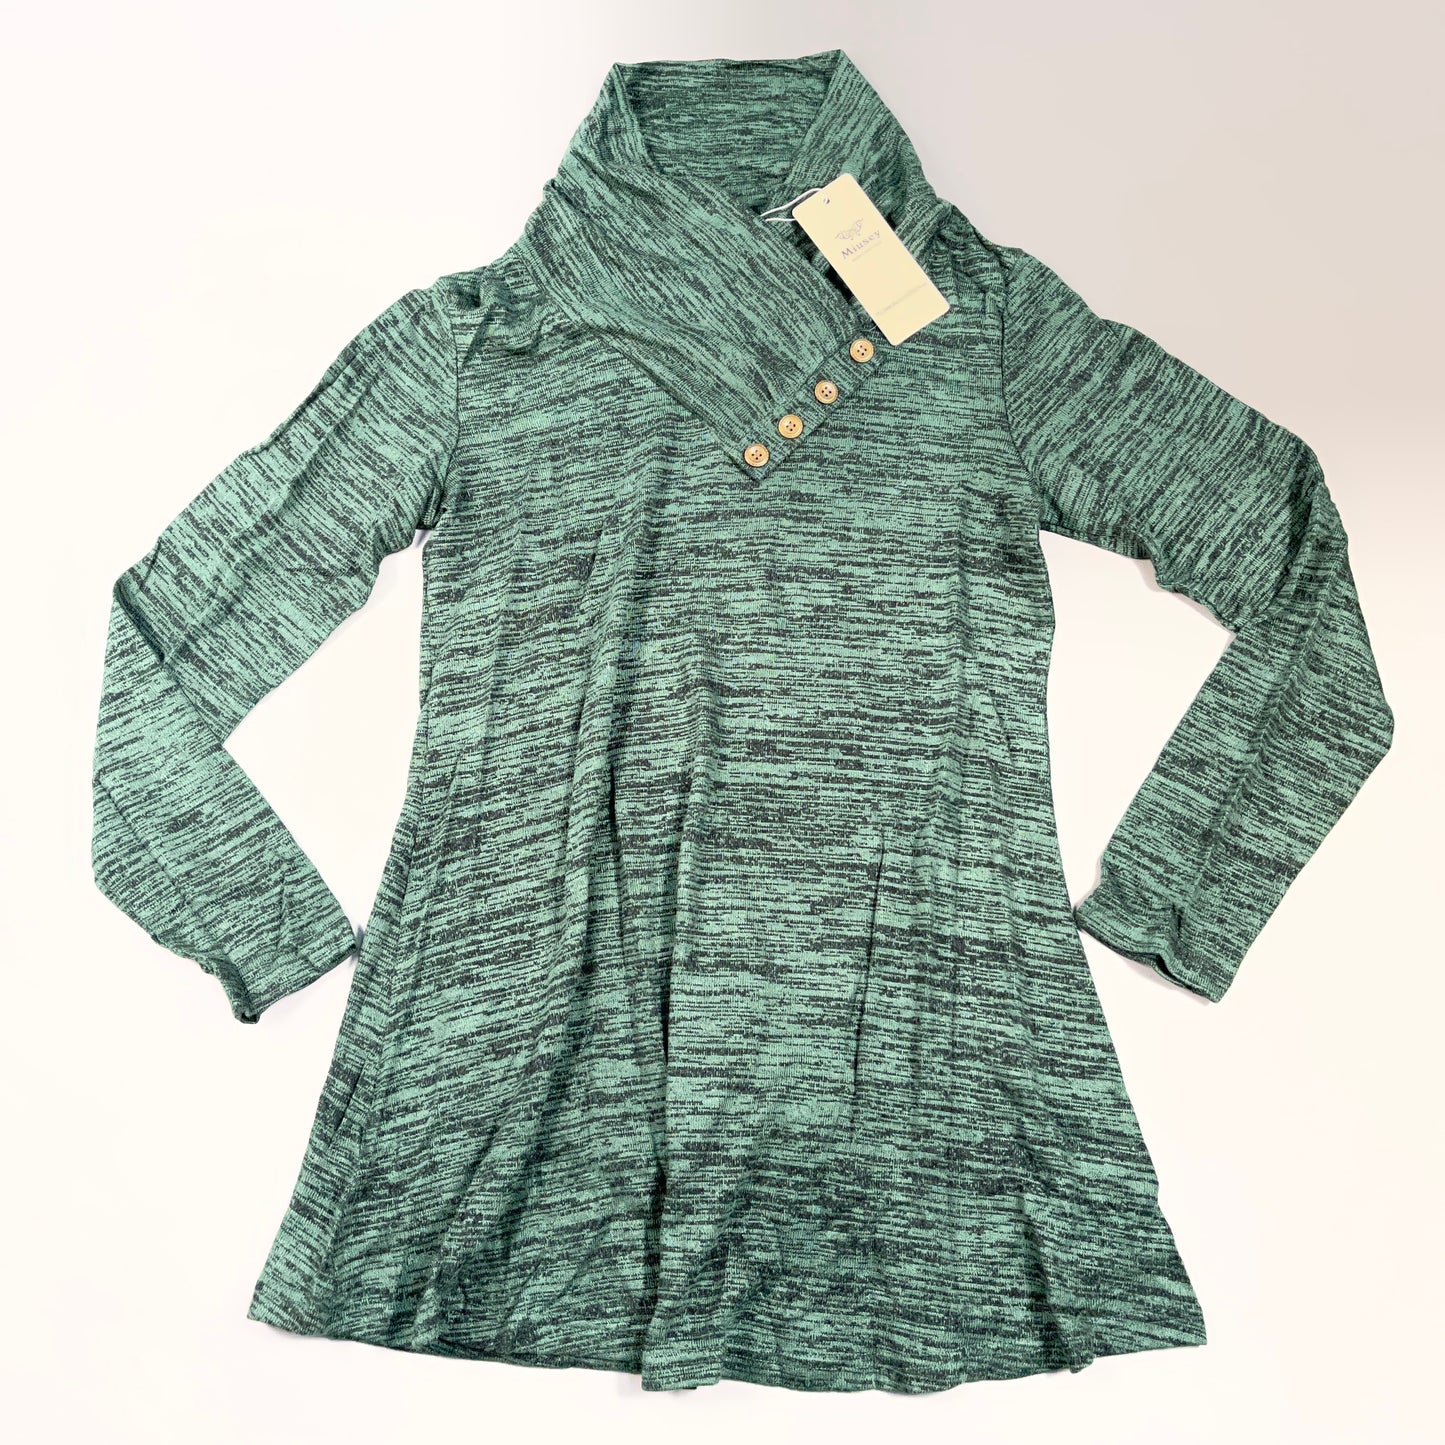 MIUSEY Long Sleeve Cowl Neck Tunic Top Blouse Women's Sz S Marled Green 20807 (New)